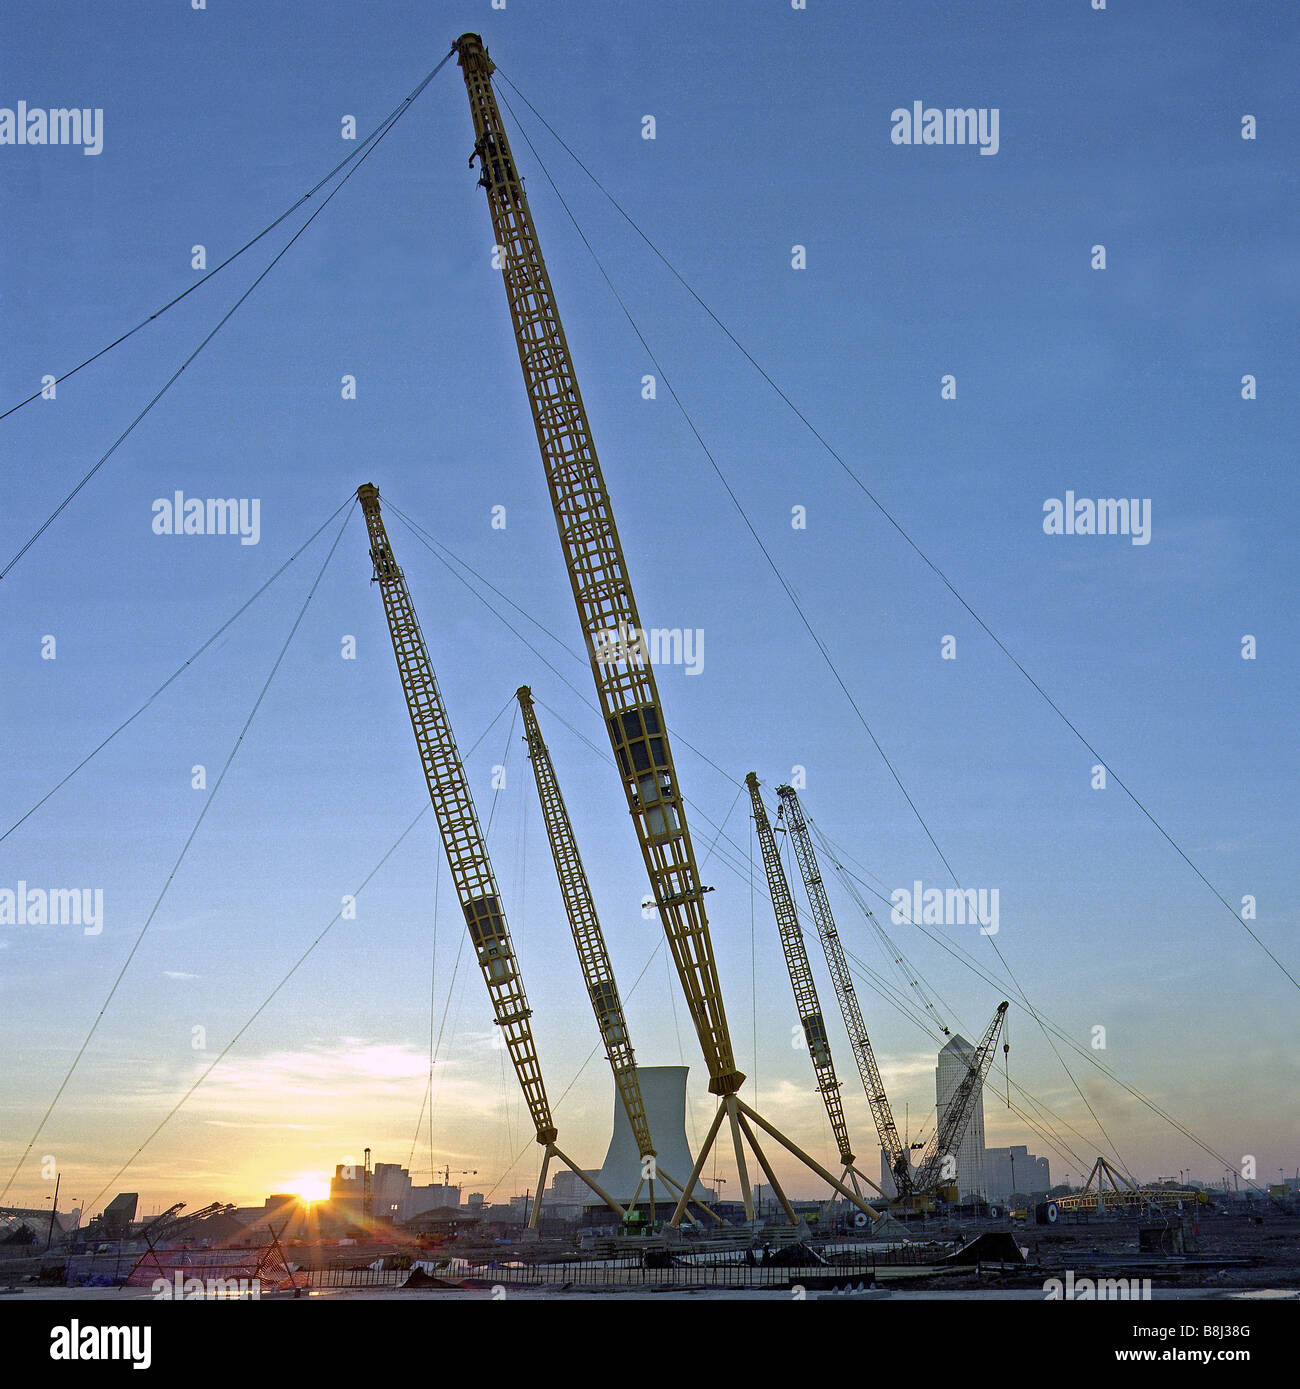 Contractors positioning the huge 100 metre support masts during the building of the Millennium Dome/O2 Arena in London, UK. Stock Photo